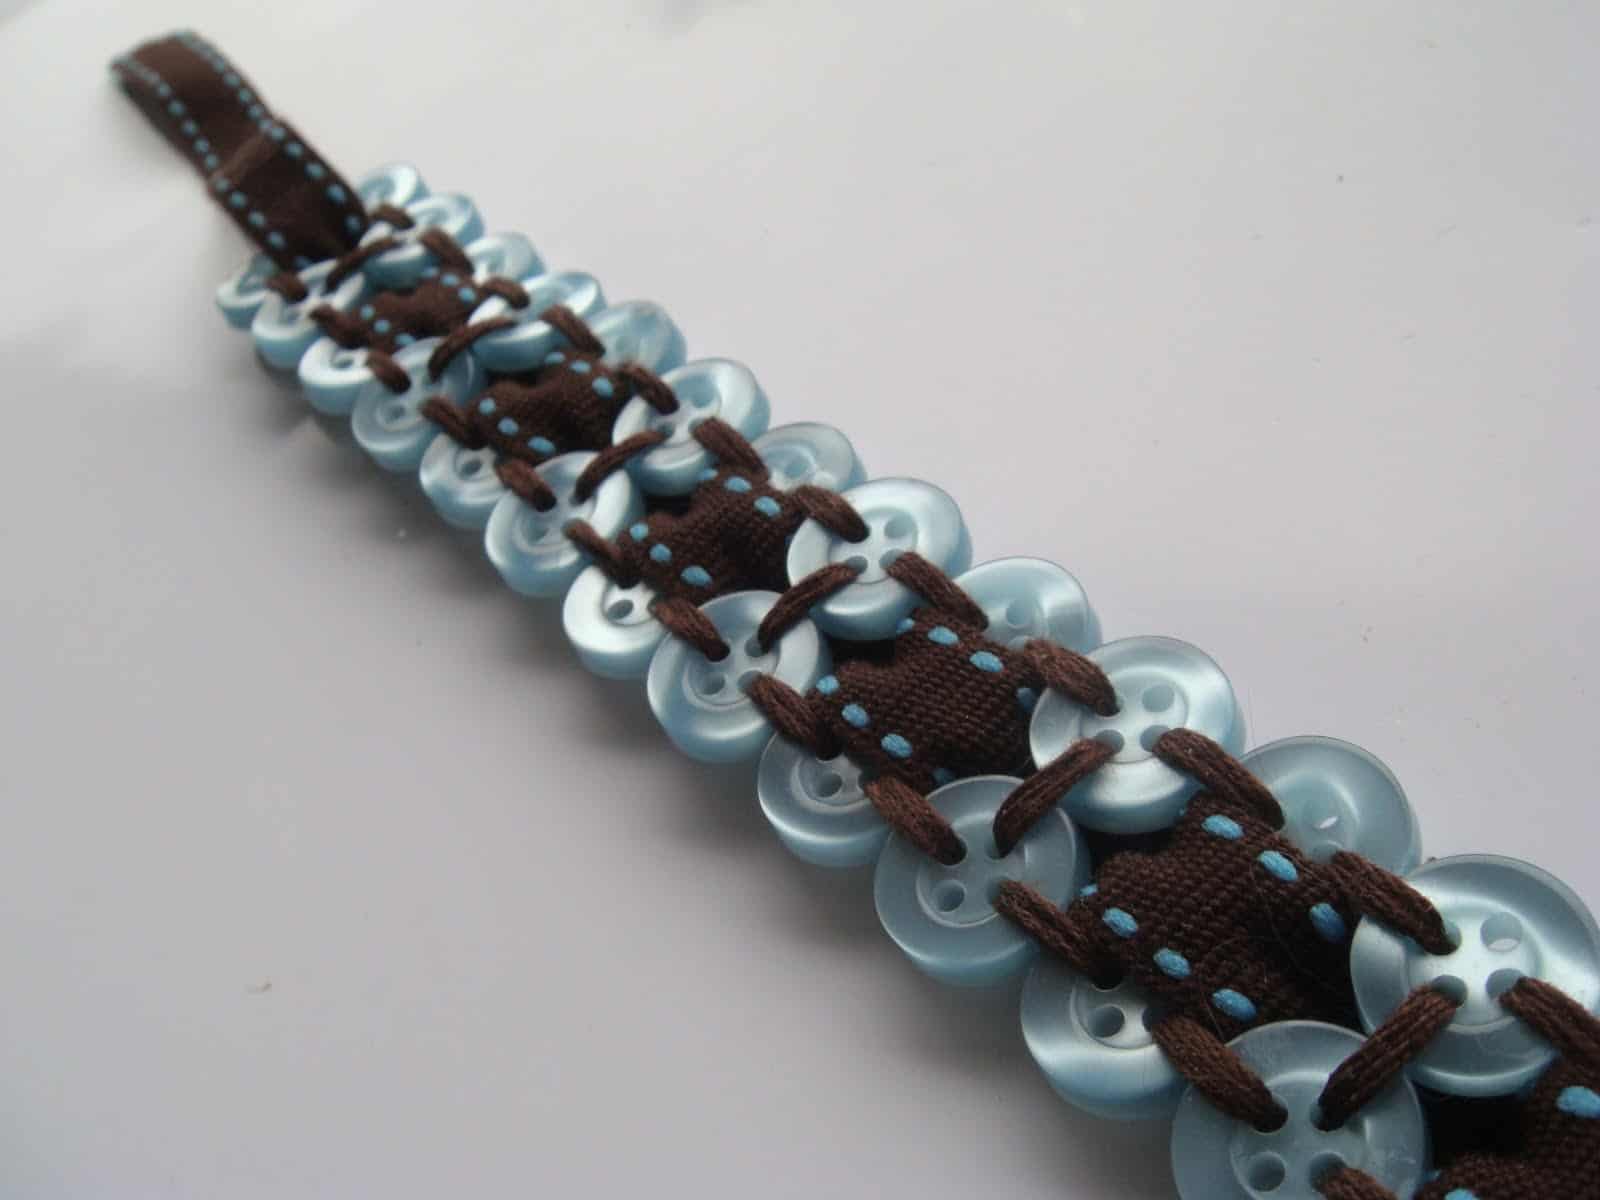 Stitchced and woven button bracelet